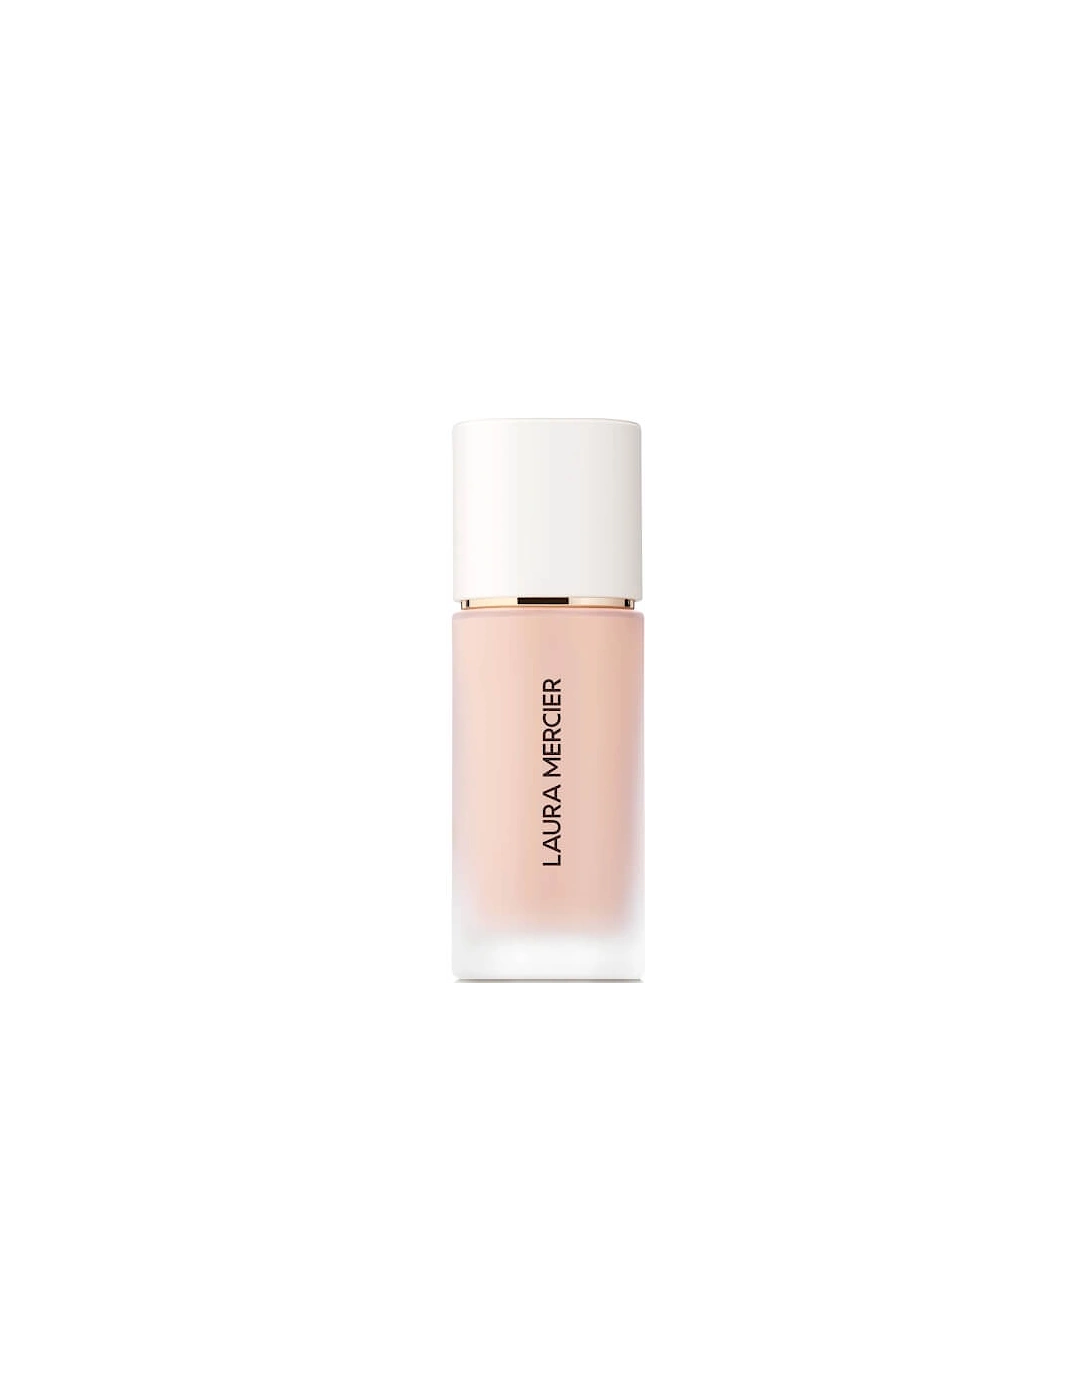 Real Flawless Foundation - 1C1 Cool Vanille, 2 of 1